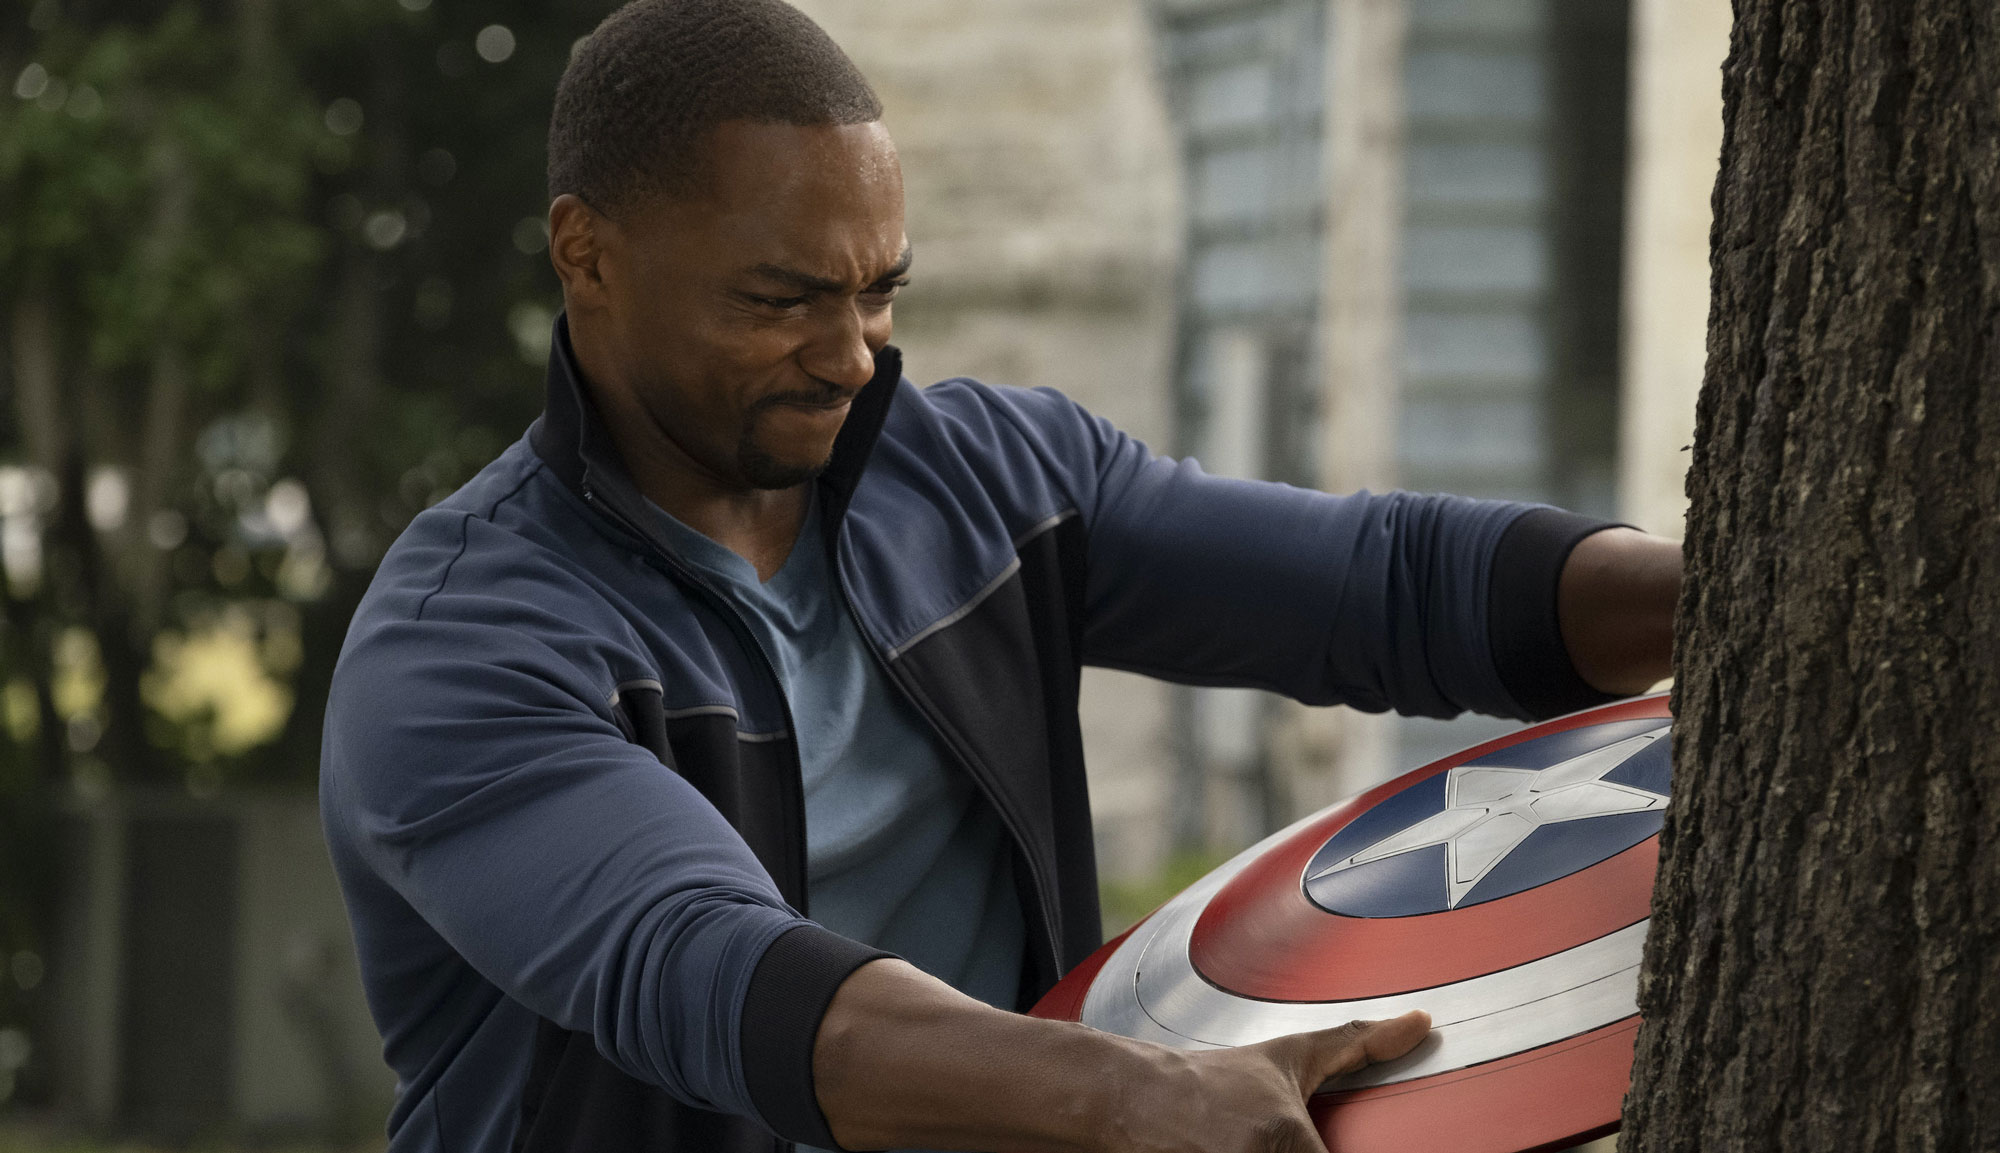 Anthony Mackie in "The Falcon and the Winter Soldier"